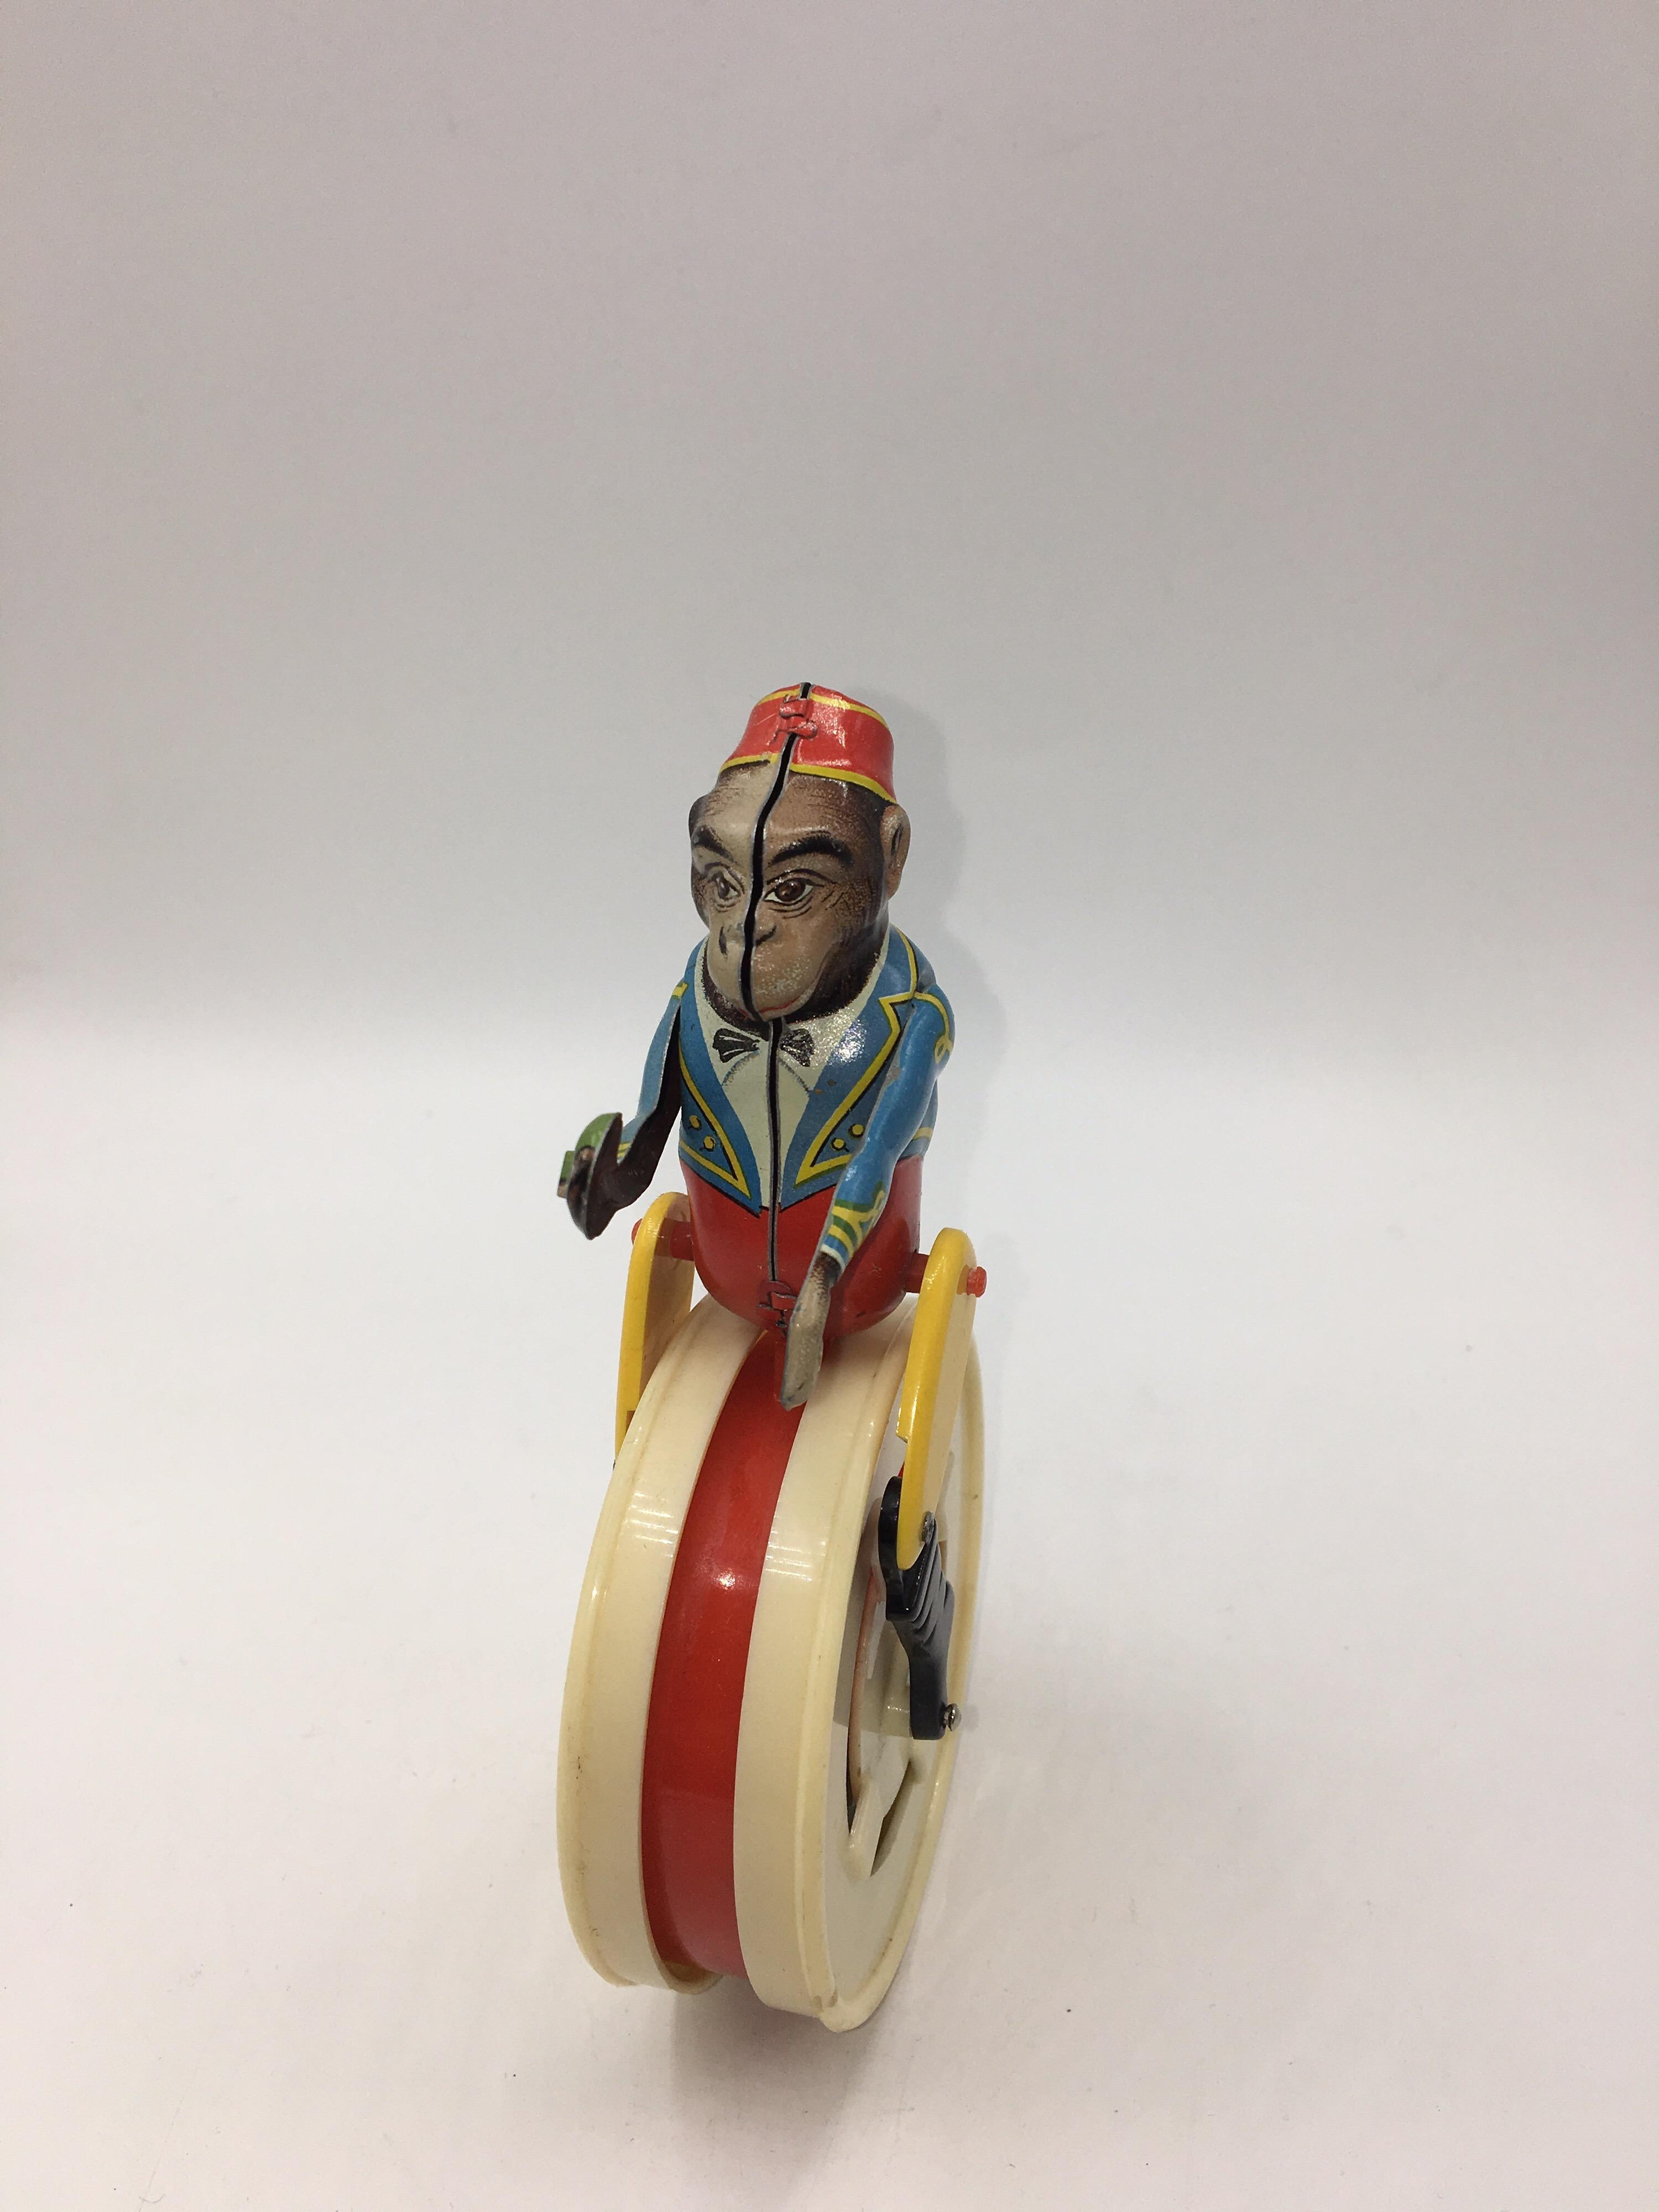 Functional and colored wind-up monkey toy, made U.S. ZONE, Germany, circa 1950.
Material: Tin and plastic.